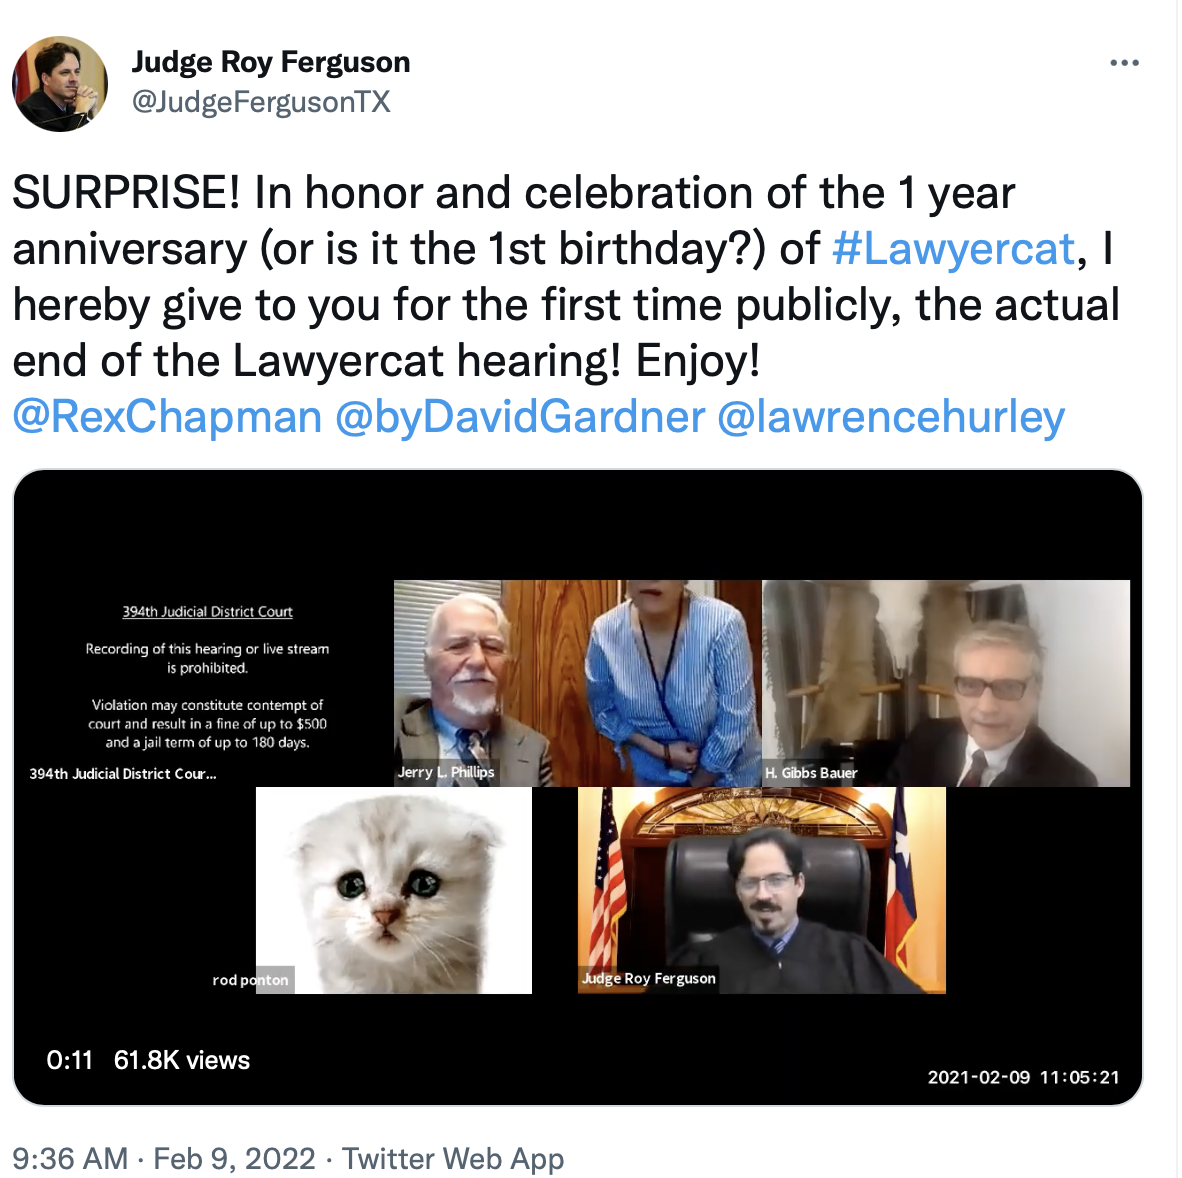 A screenshot of a tweet from the judge who oversaw the Lawyercat hearing